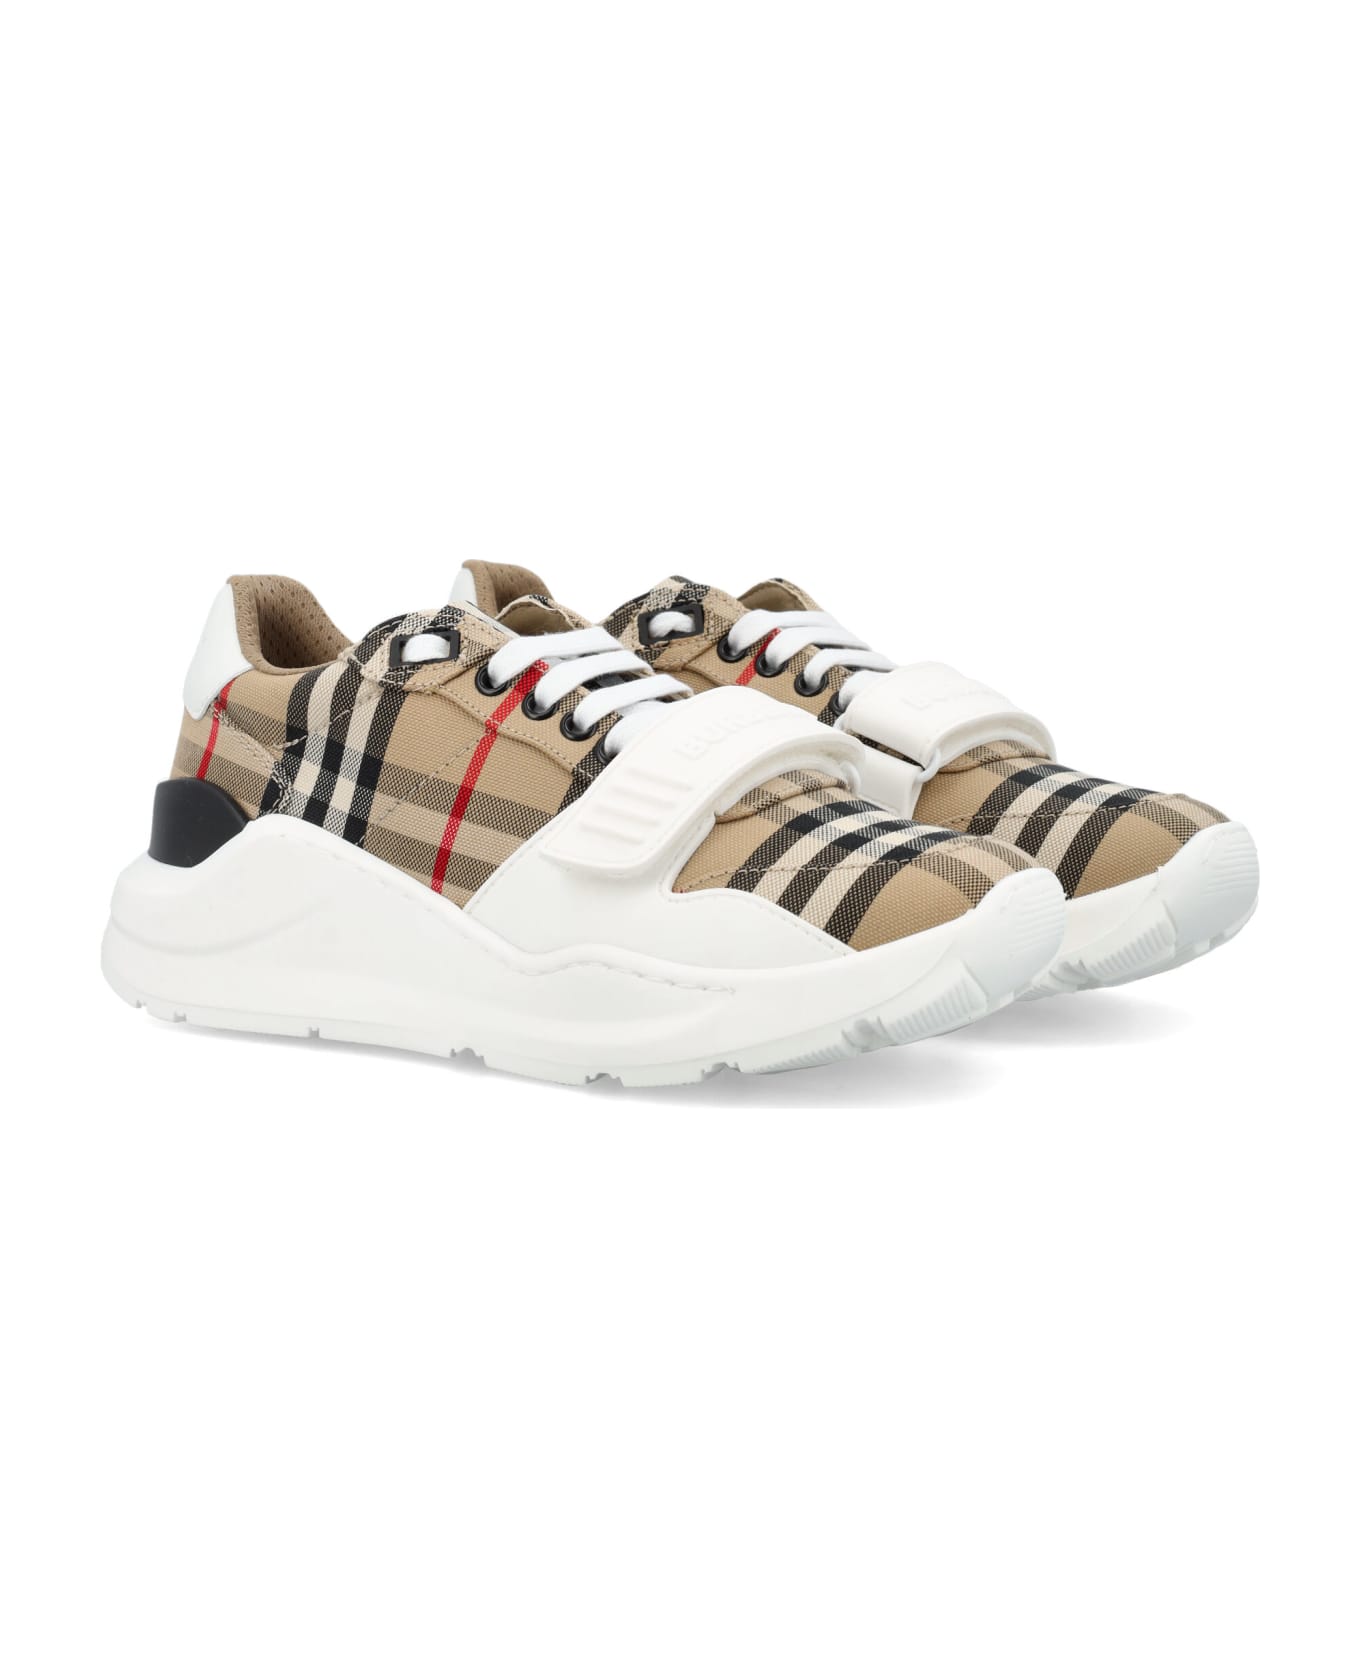 Burberry London Check Sneakers - ARCHIVE BEIGE IP CHK